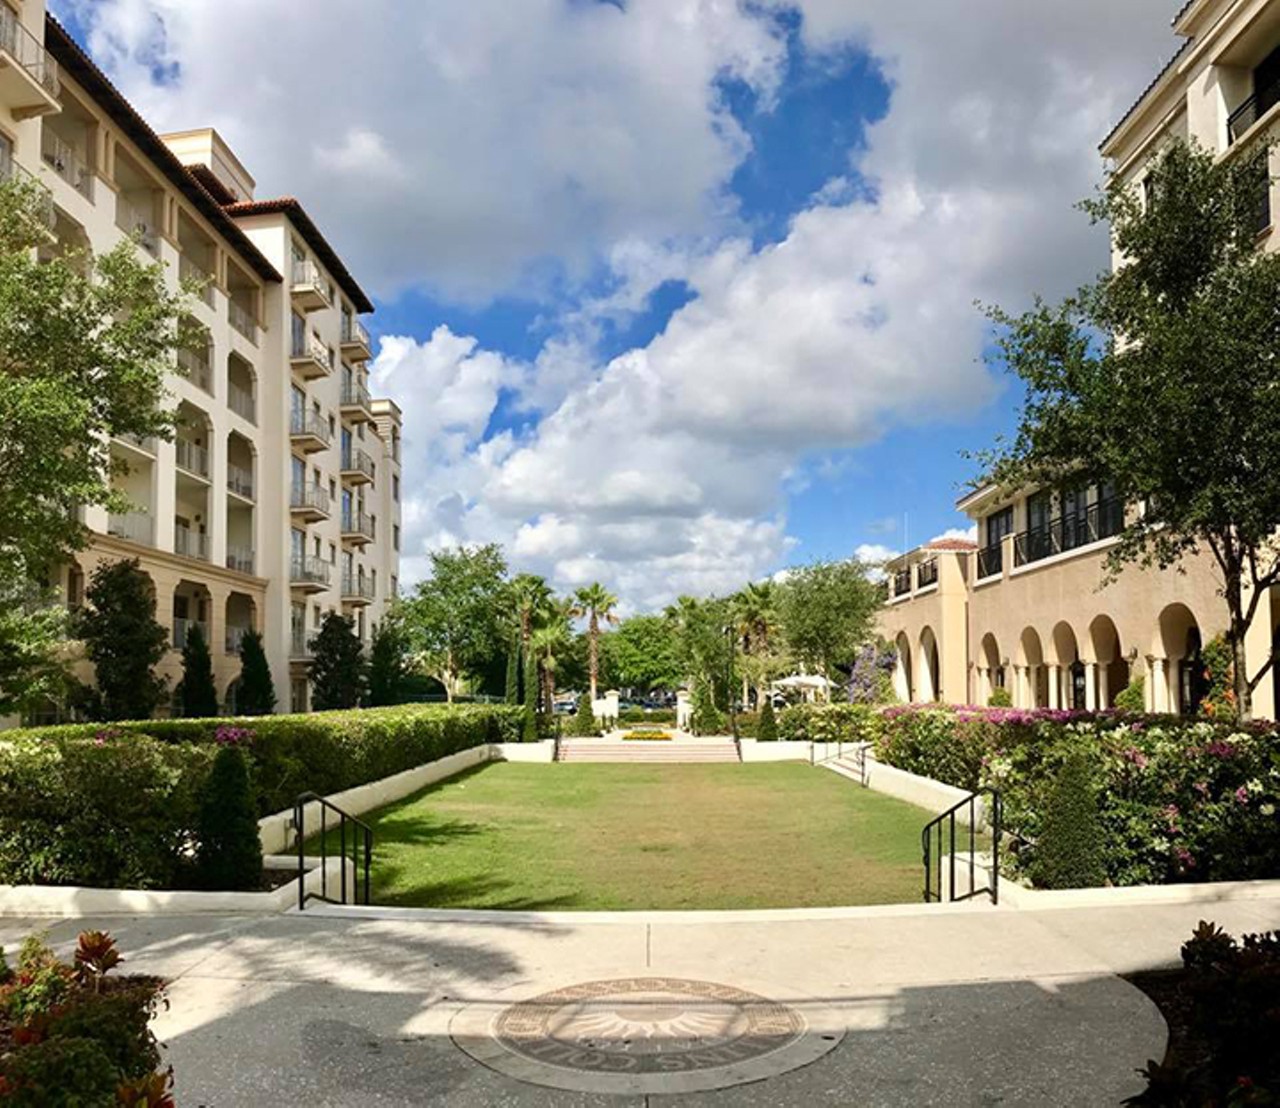 Thursday, May 25Get Your Jazz On at the Alfond Inn